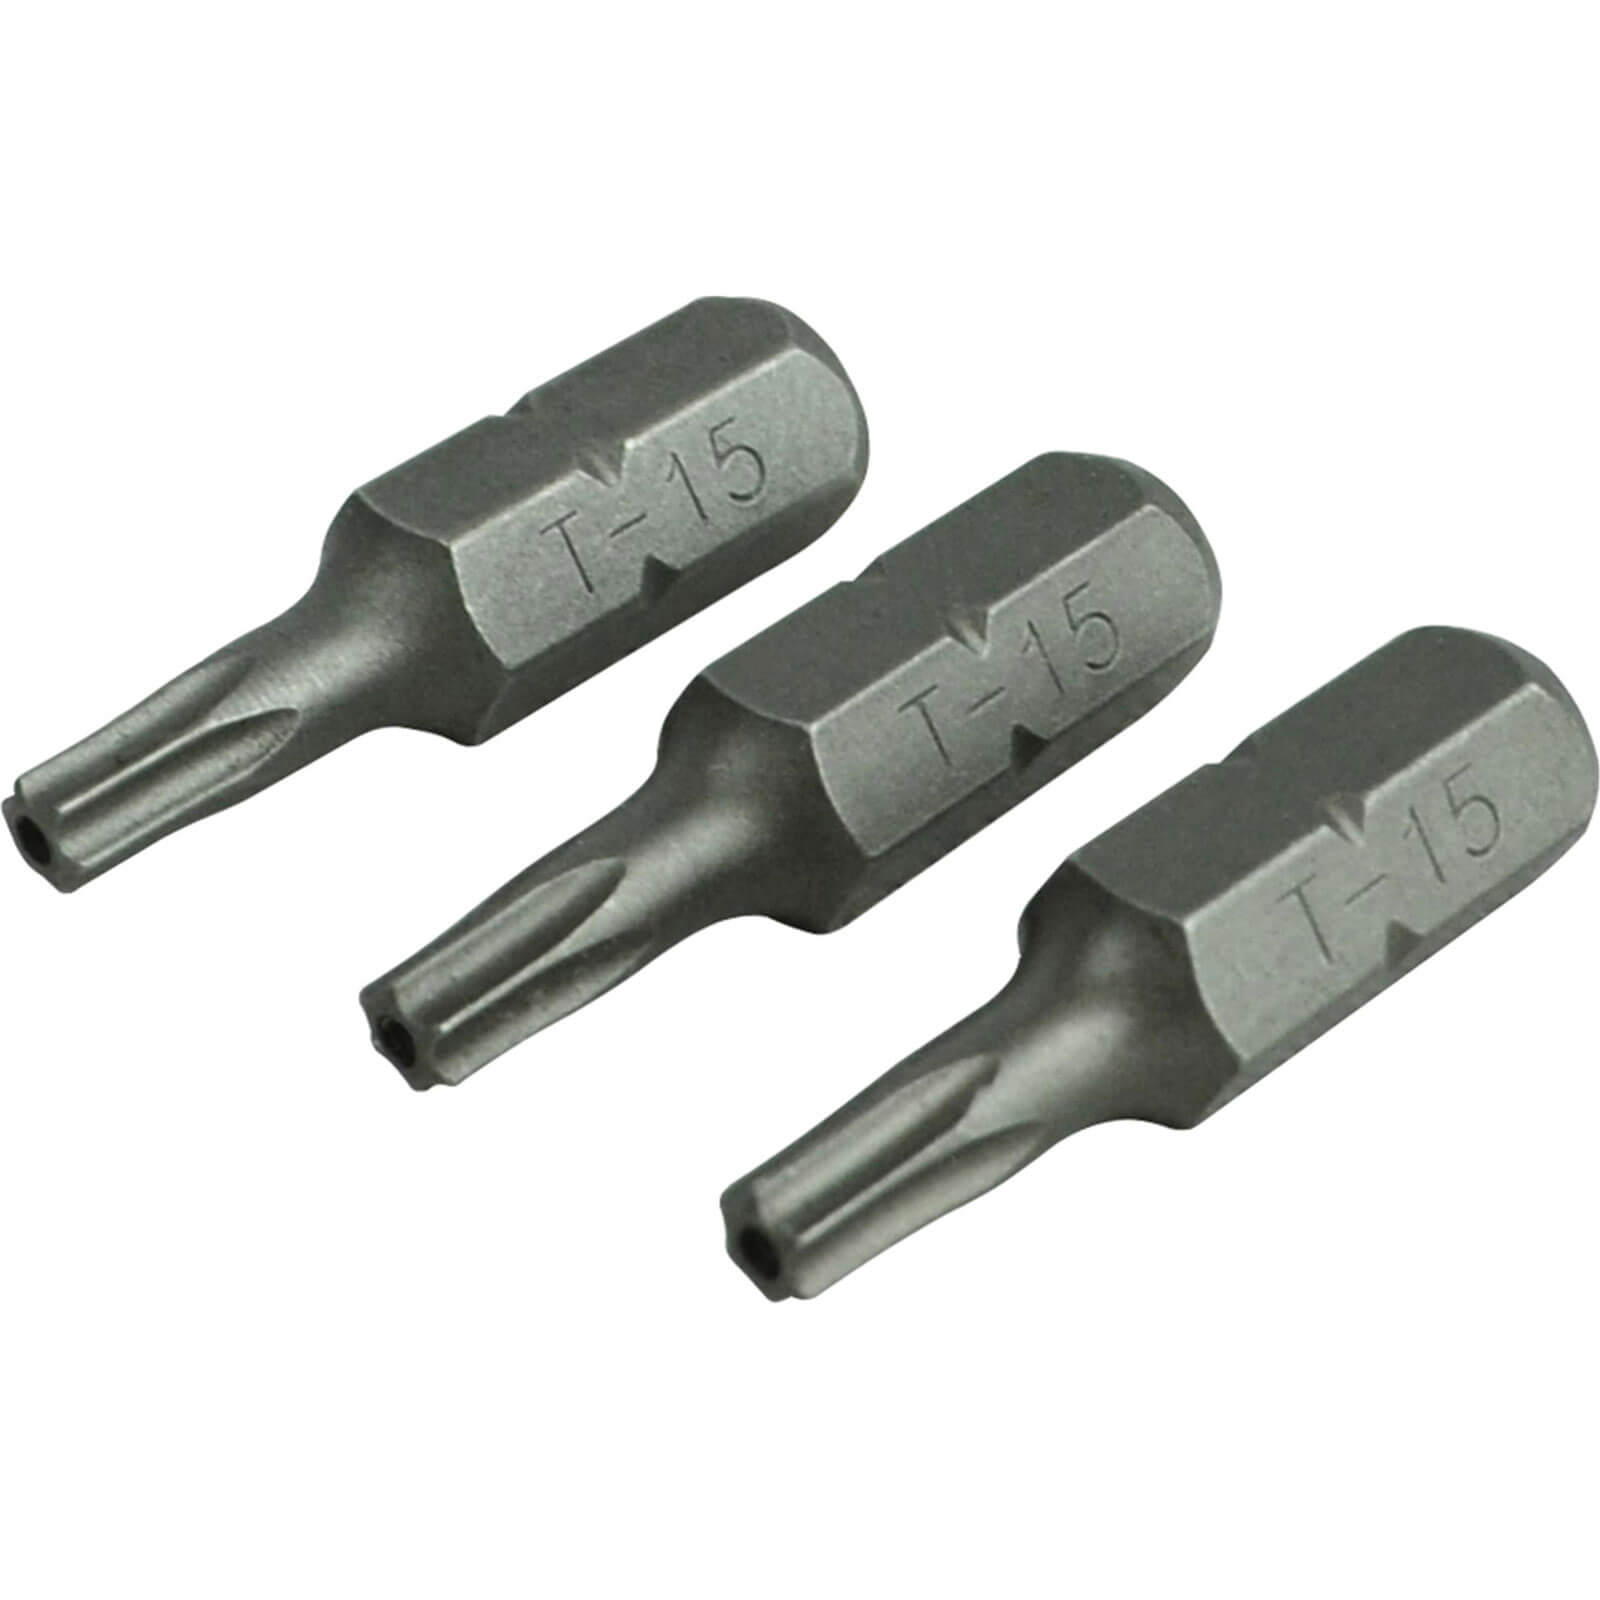 Image of Faithfull S2 Security Torx Screwdriver Bits T15 25mm Pack of 3